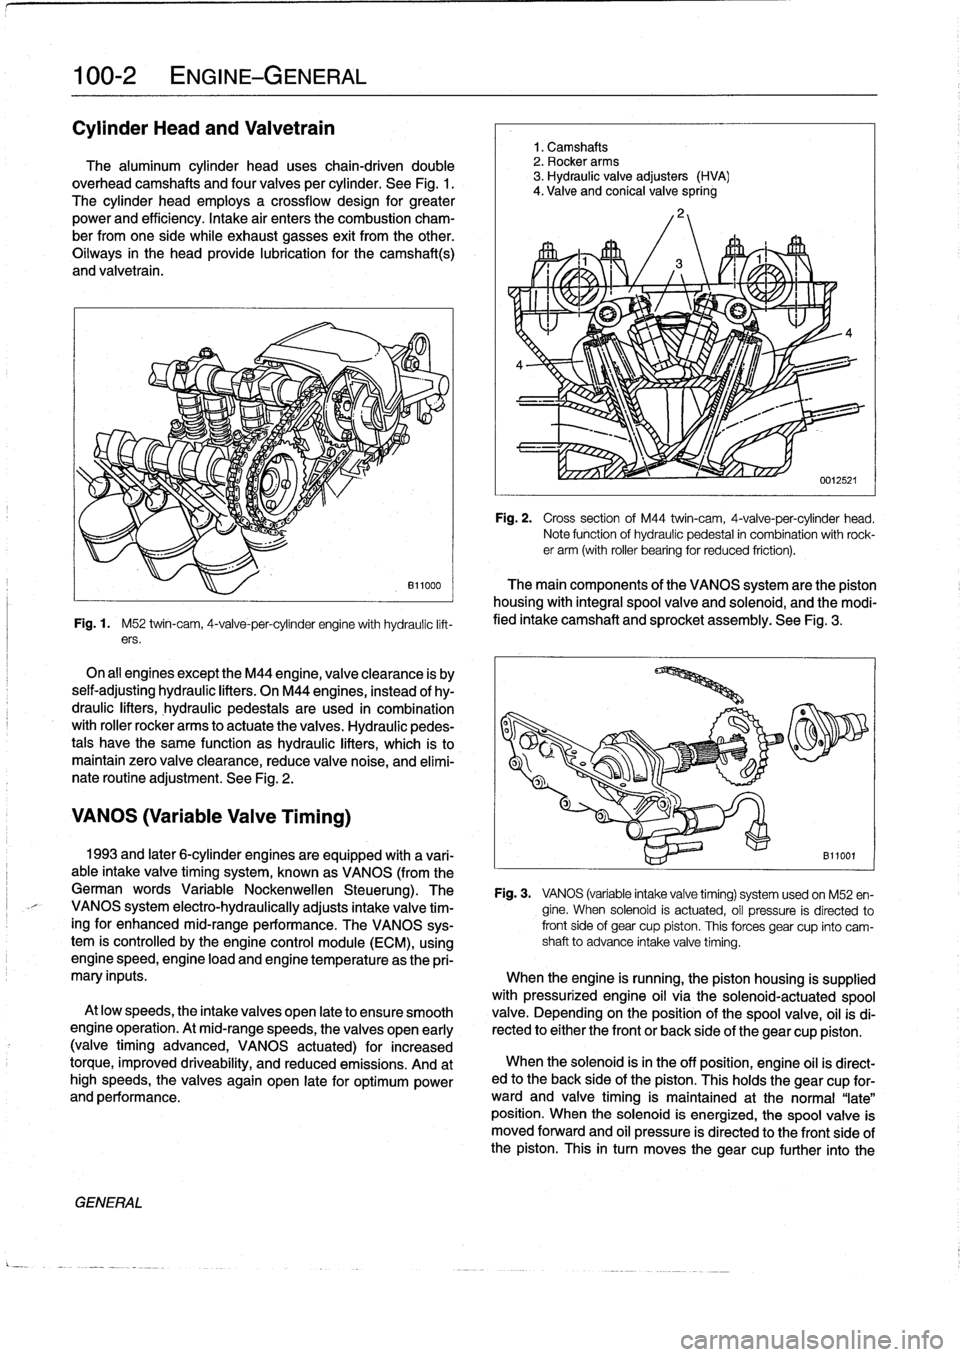 BMW M3 1993 E36 Workshop Manual 
100-2
ENGINE-GENERAL

Cylinder
Head
and
Valvetrain

The
aluminum
cylinder
head
uses
chain-driven
double
overhead
camshafts
and
four
valves
per
cylinder
.
See
Fig
.
1
.

The
cylinder
head
employs
a
cr